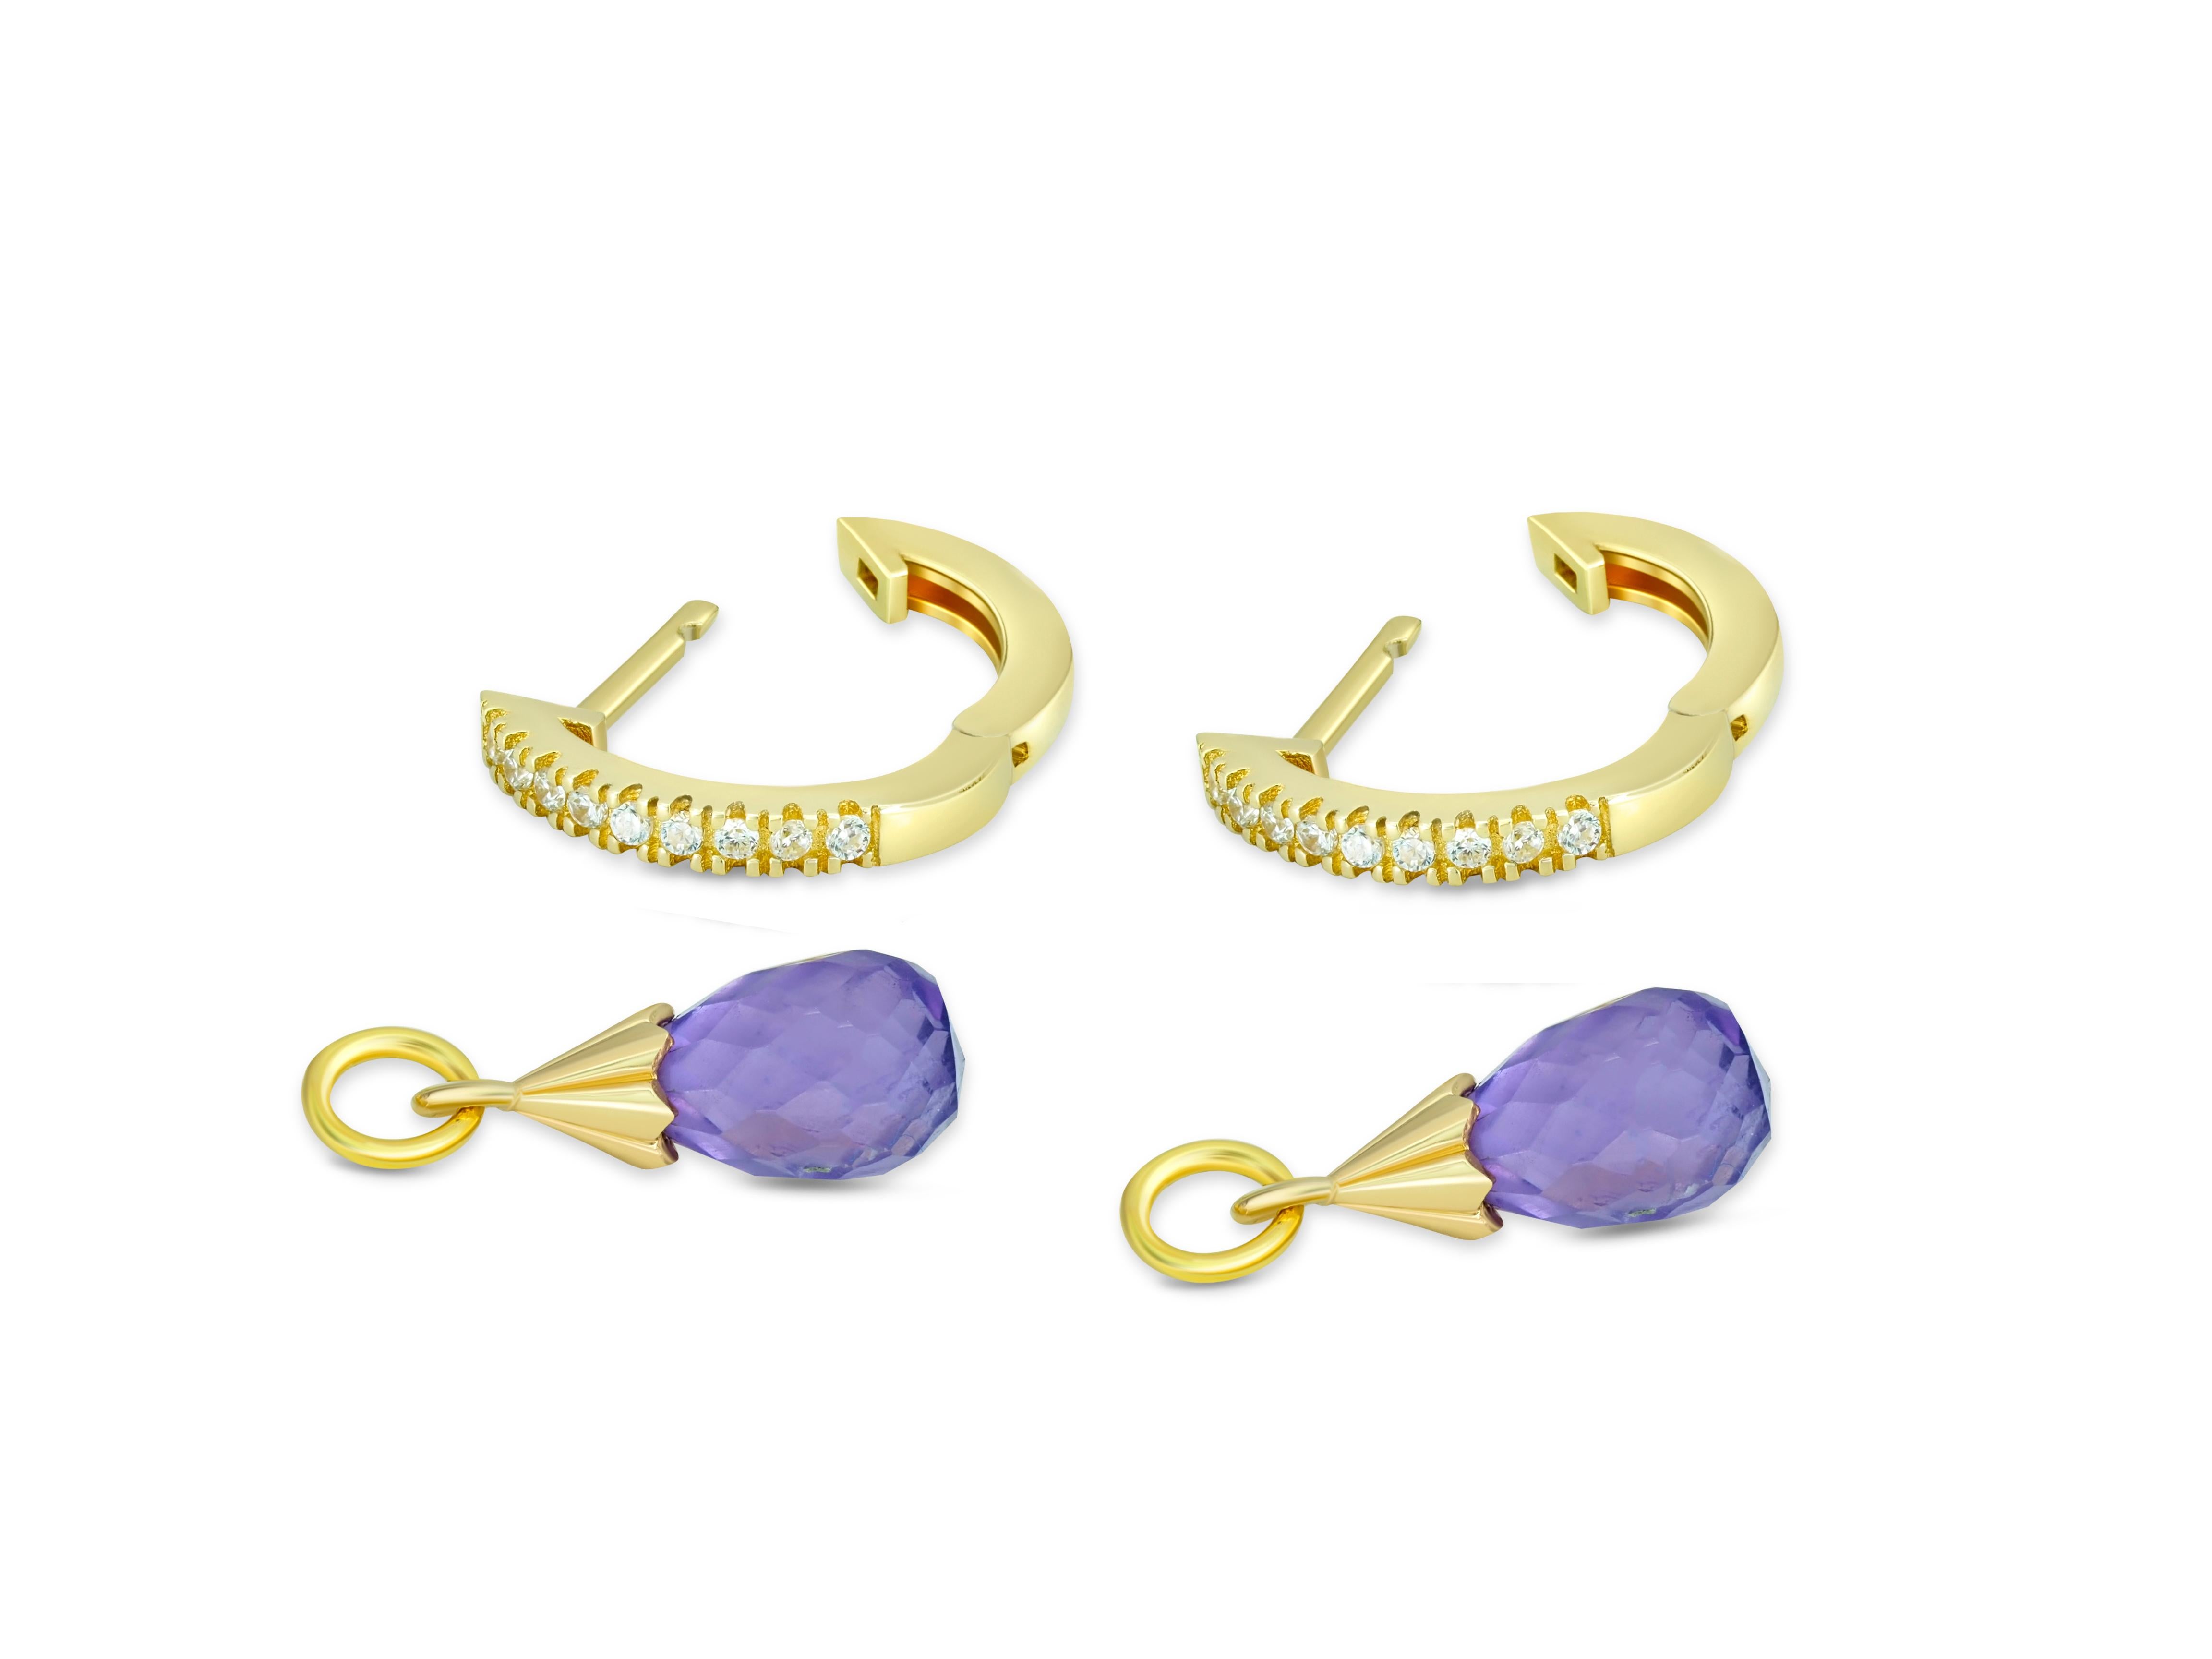 Diamond Hoop Earrings and Amethyst Briolette Charms in 14k Gold For Sale 2